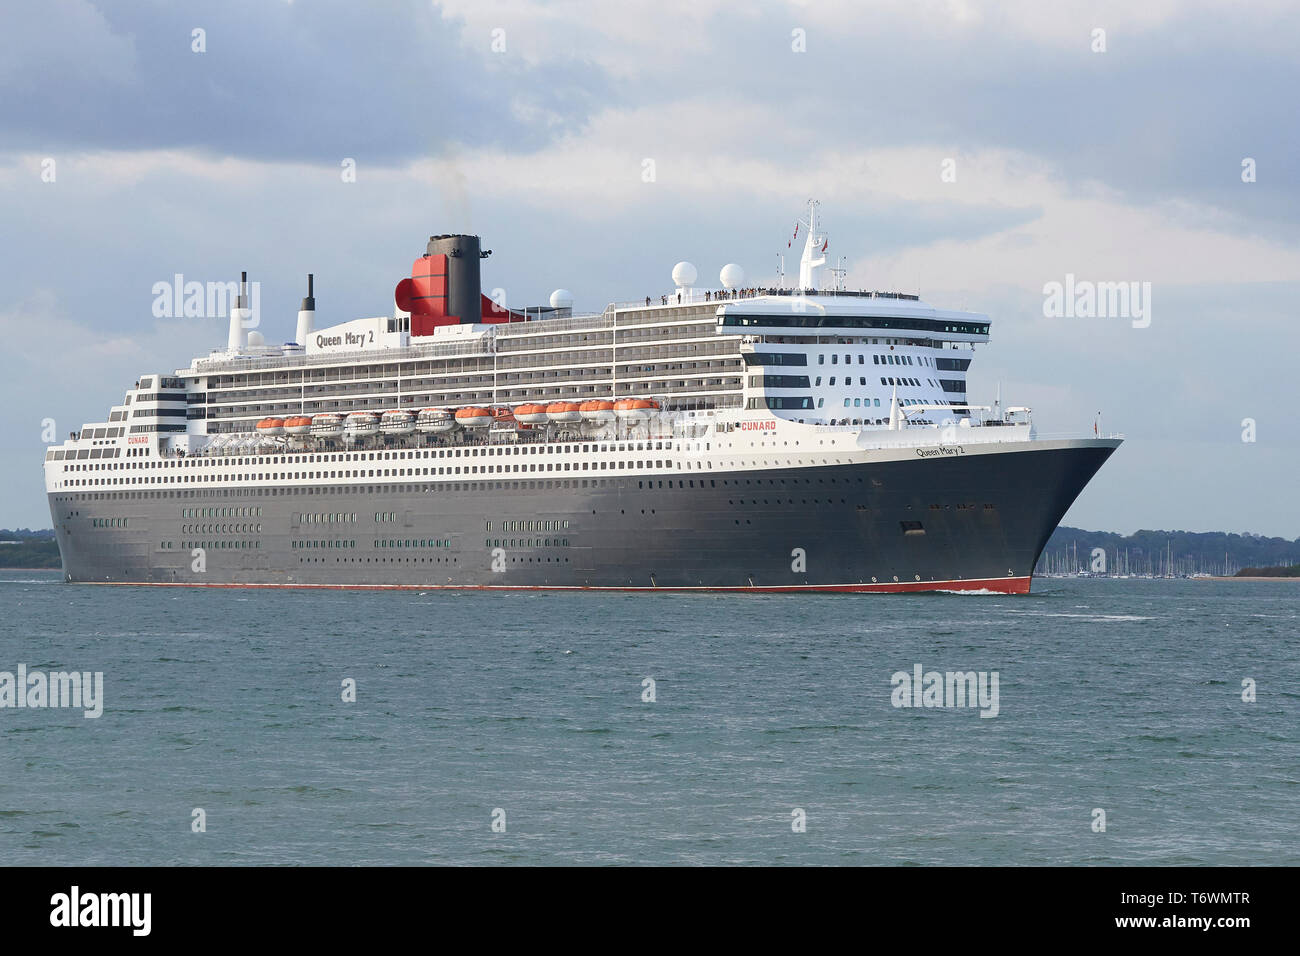 The Cunard Line, Transatlantic Ocean Liner, RMS QUEEN MARY 2, Sailing Out Of The Port Of Southampton, UK. Bound For New York, 28 April 2019. Stock Photo